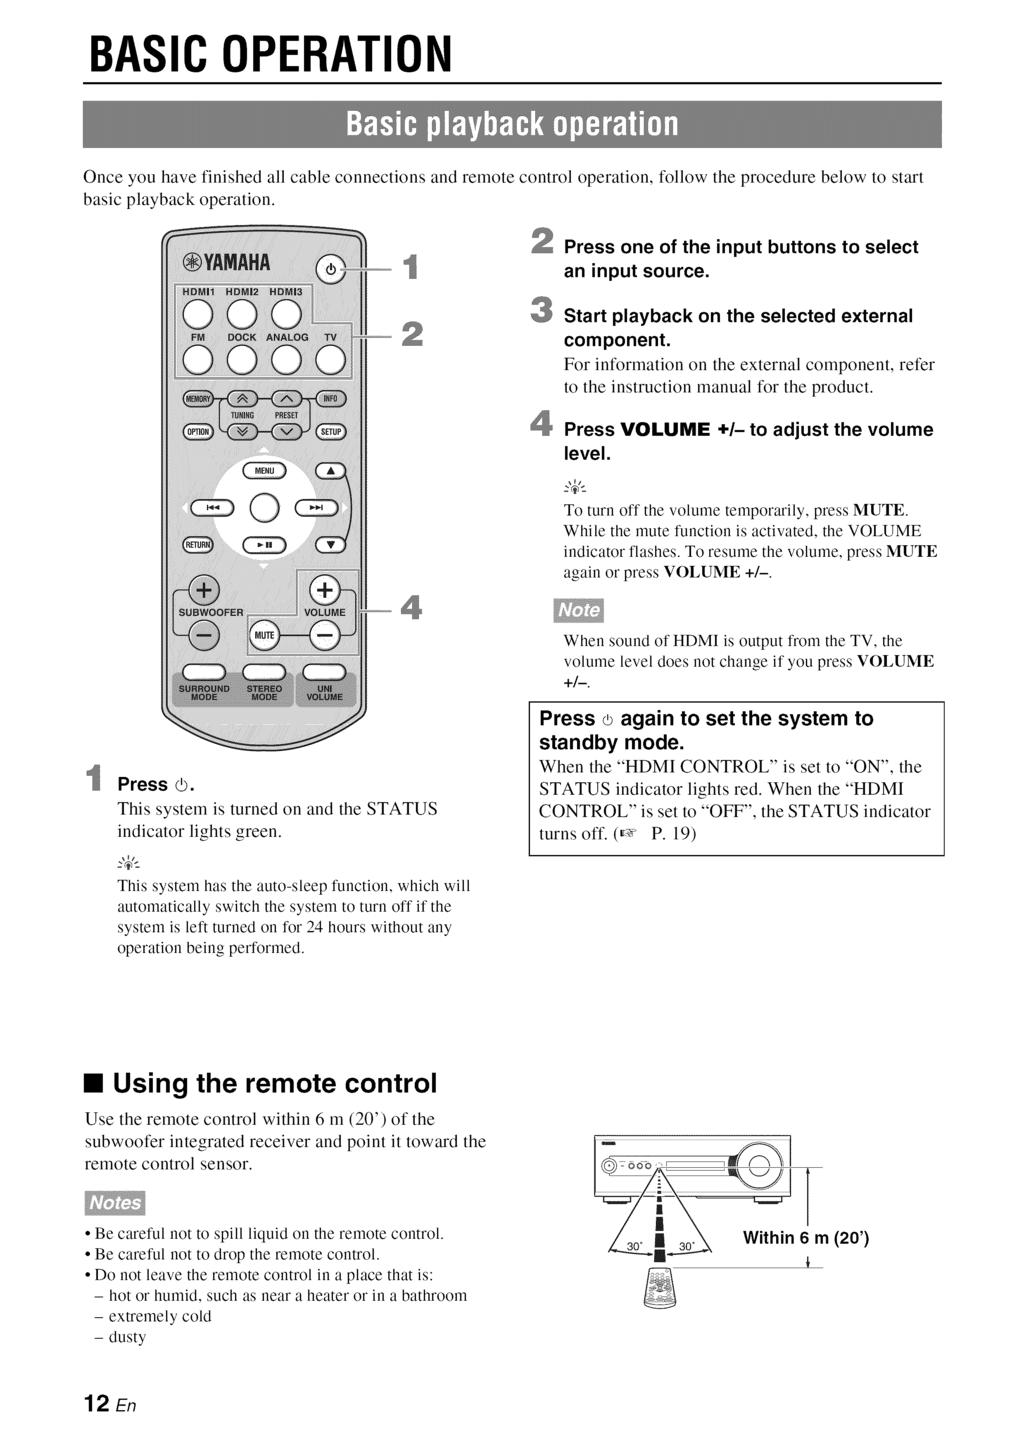 BASICOPERATION Once you have finished all cable connections and remote control operation, follow the procedure below to start basic playback operation.